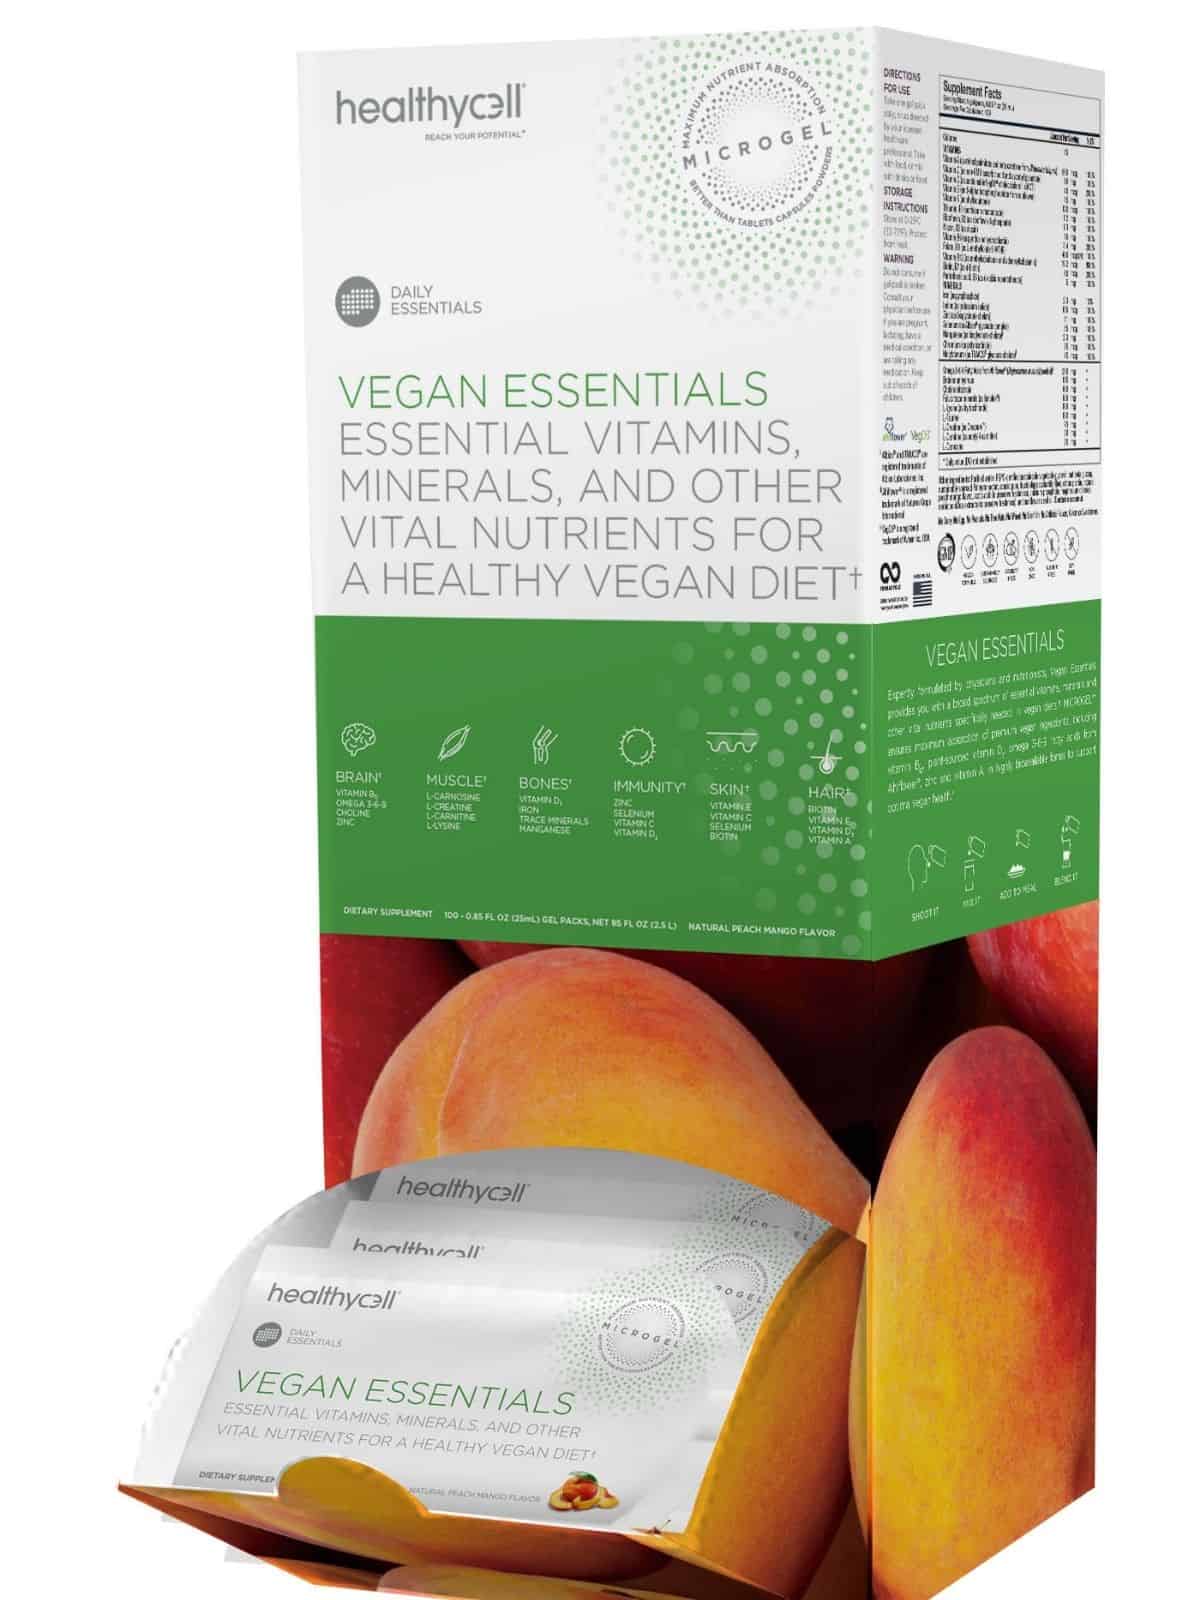 Healthycell vegan essentials packets in box. 